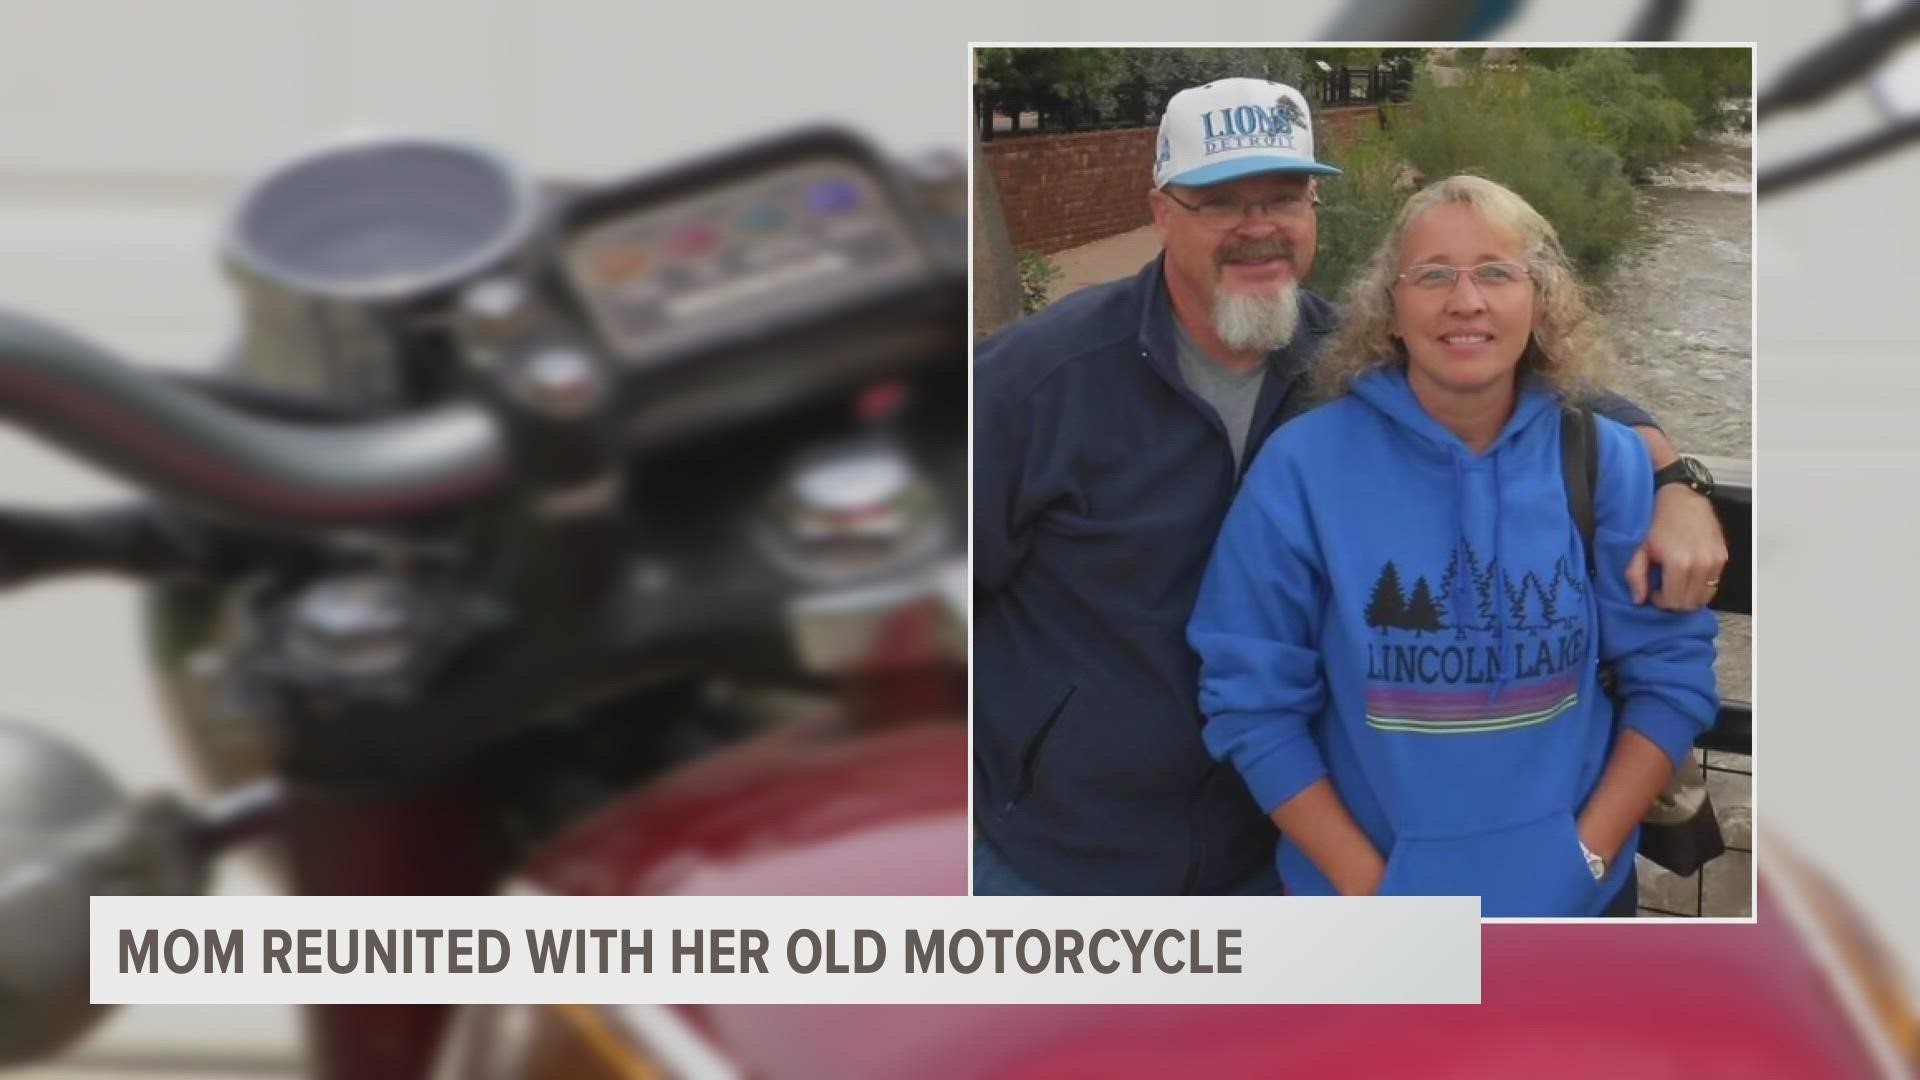 The 1972 Honda motorcycle was rusting in a barn until her son created his plan to surprise her.